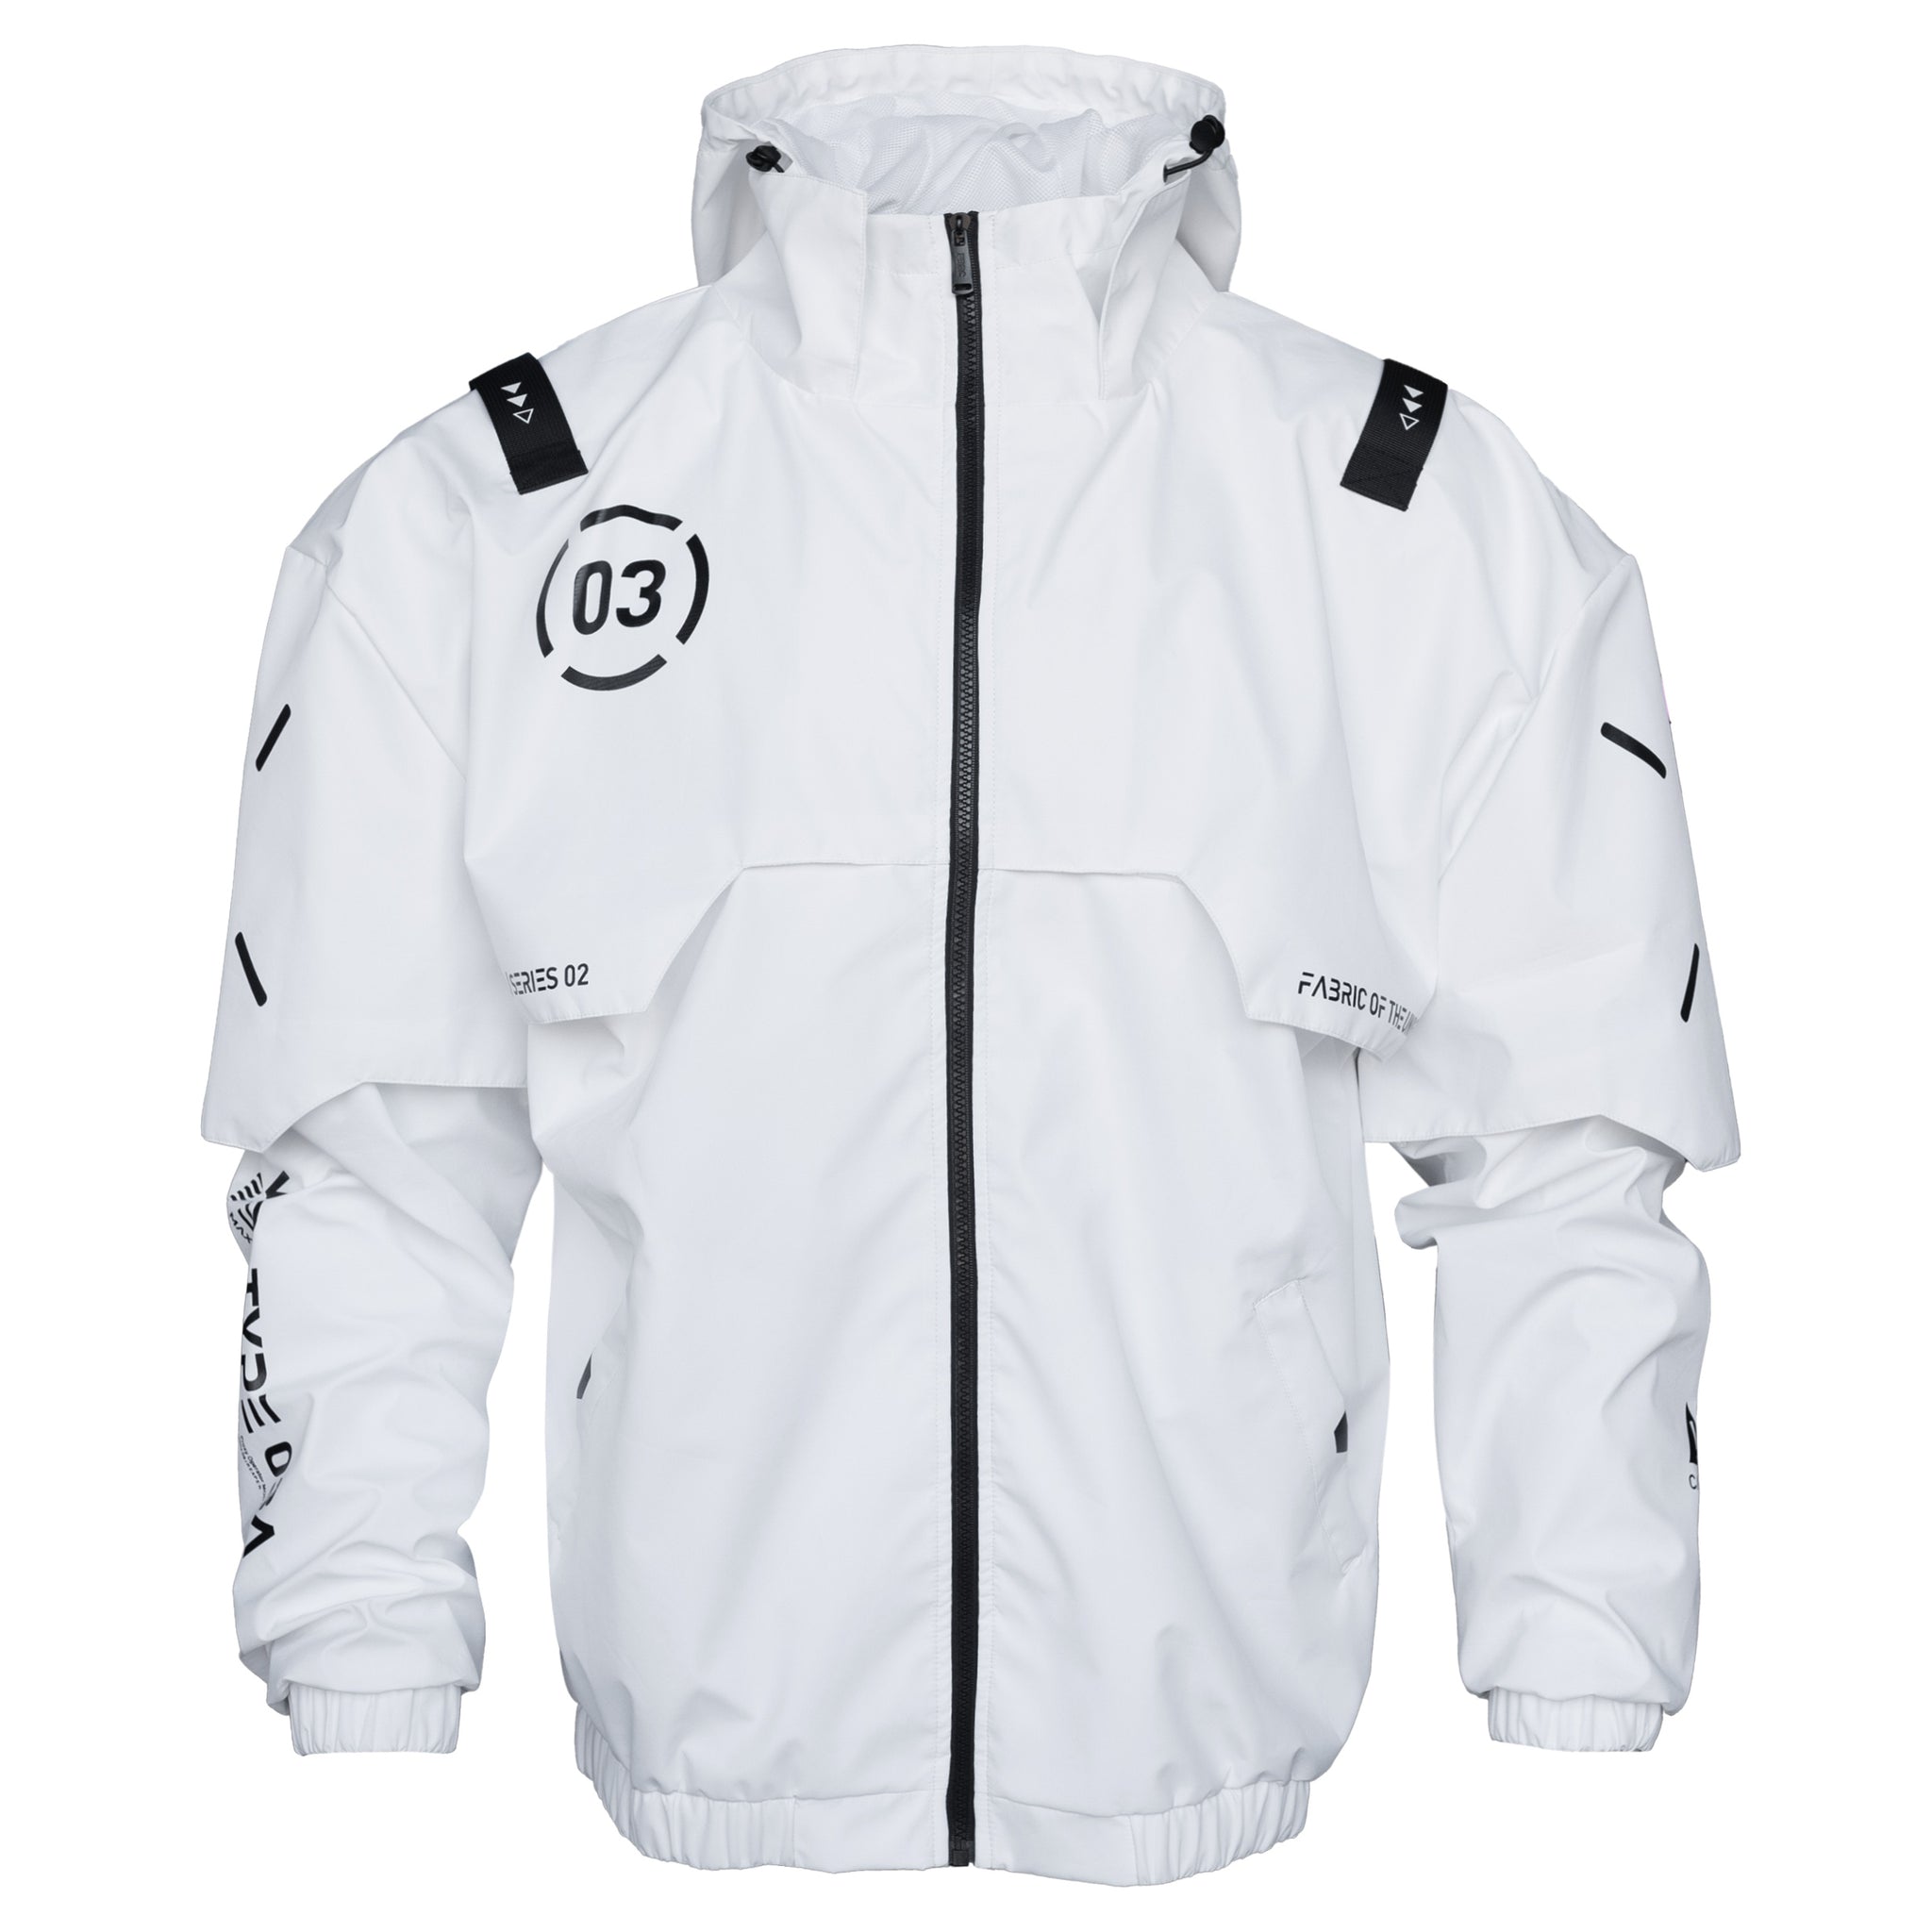 WB-Type 03A White Windbreaker - Fabric of the Universe